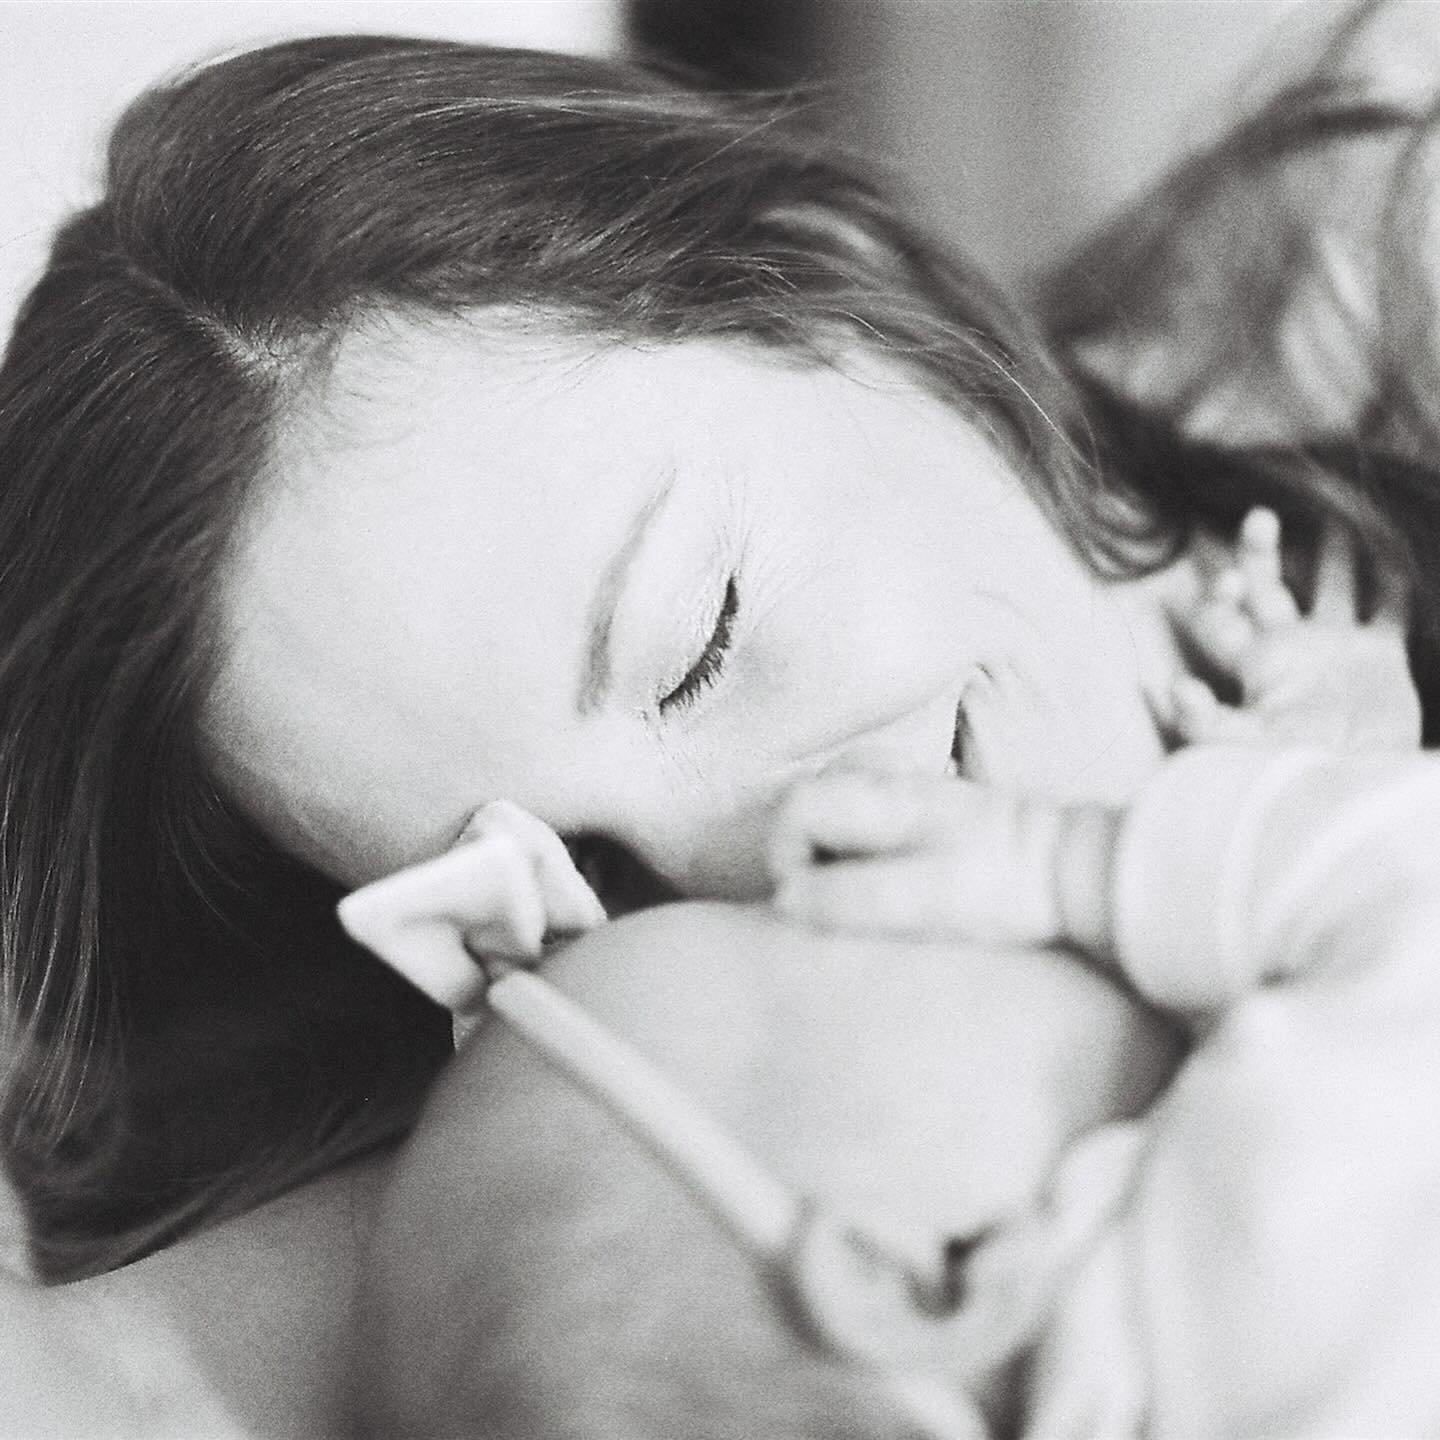 Some black &amp; white film faves from a winter newborn session because - Ohio in winter means you CAN shoot film, there&rsquo;s probably just no sun, so it has to be B&amp;W.